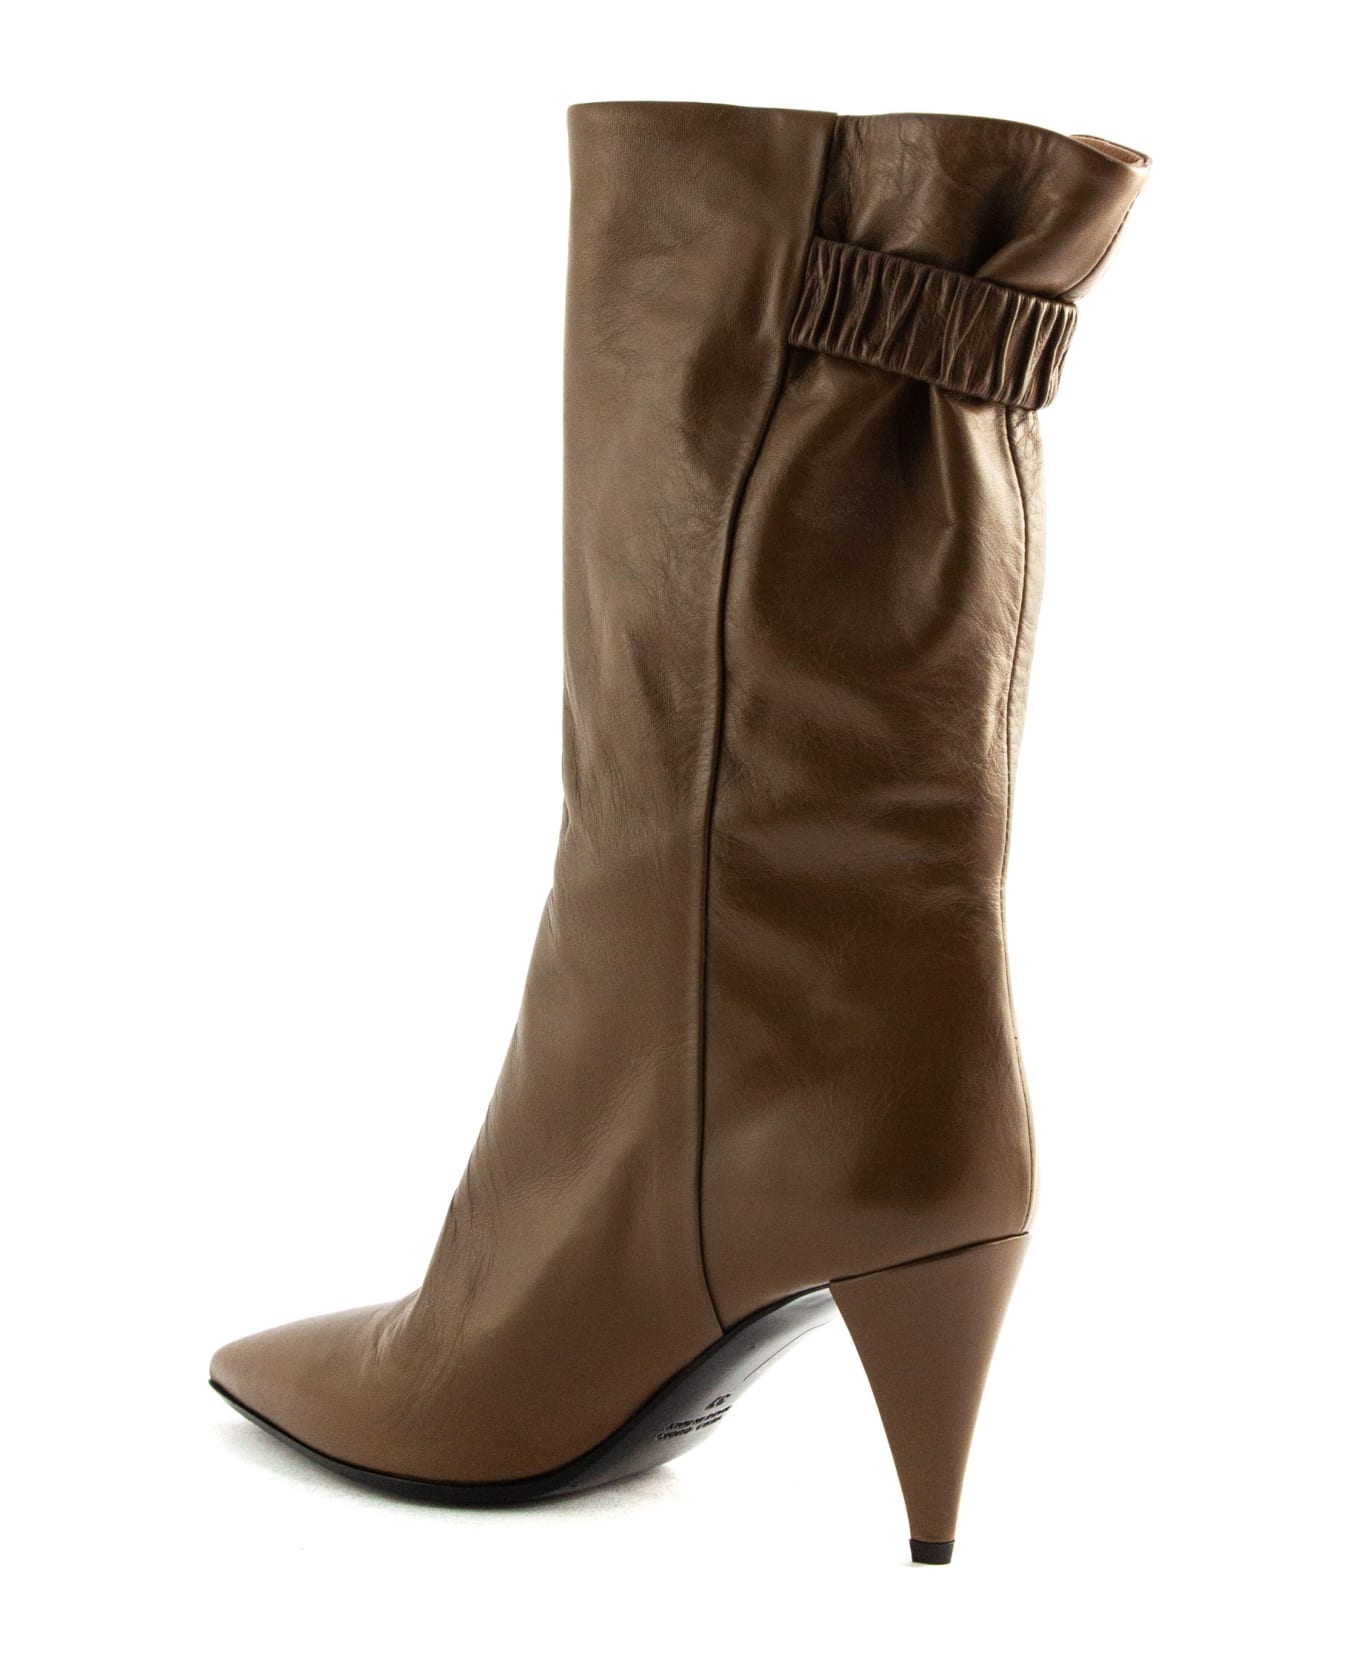 Strategia Brown Leather Ankle Boots - Cuoio